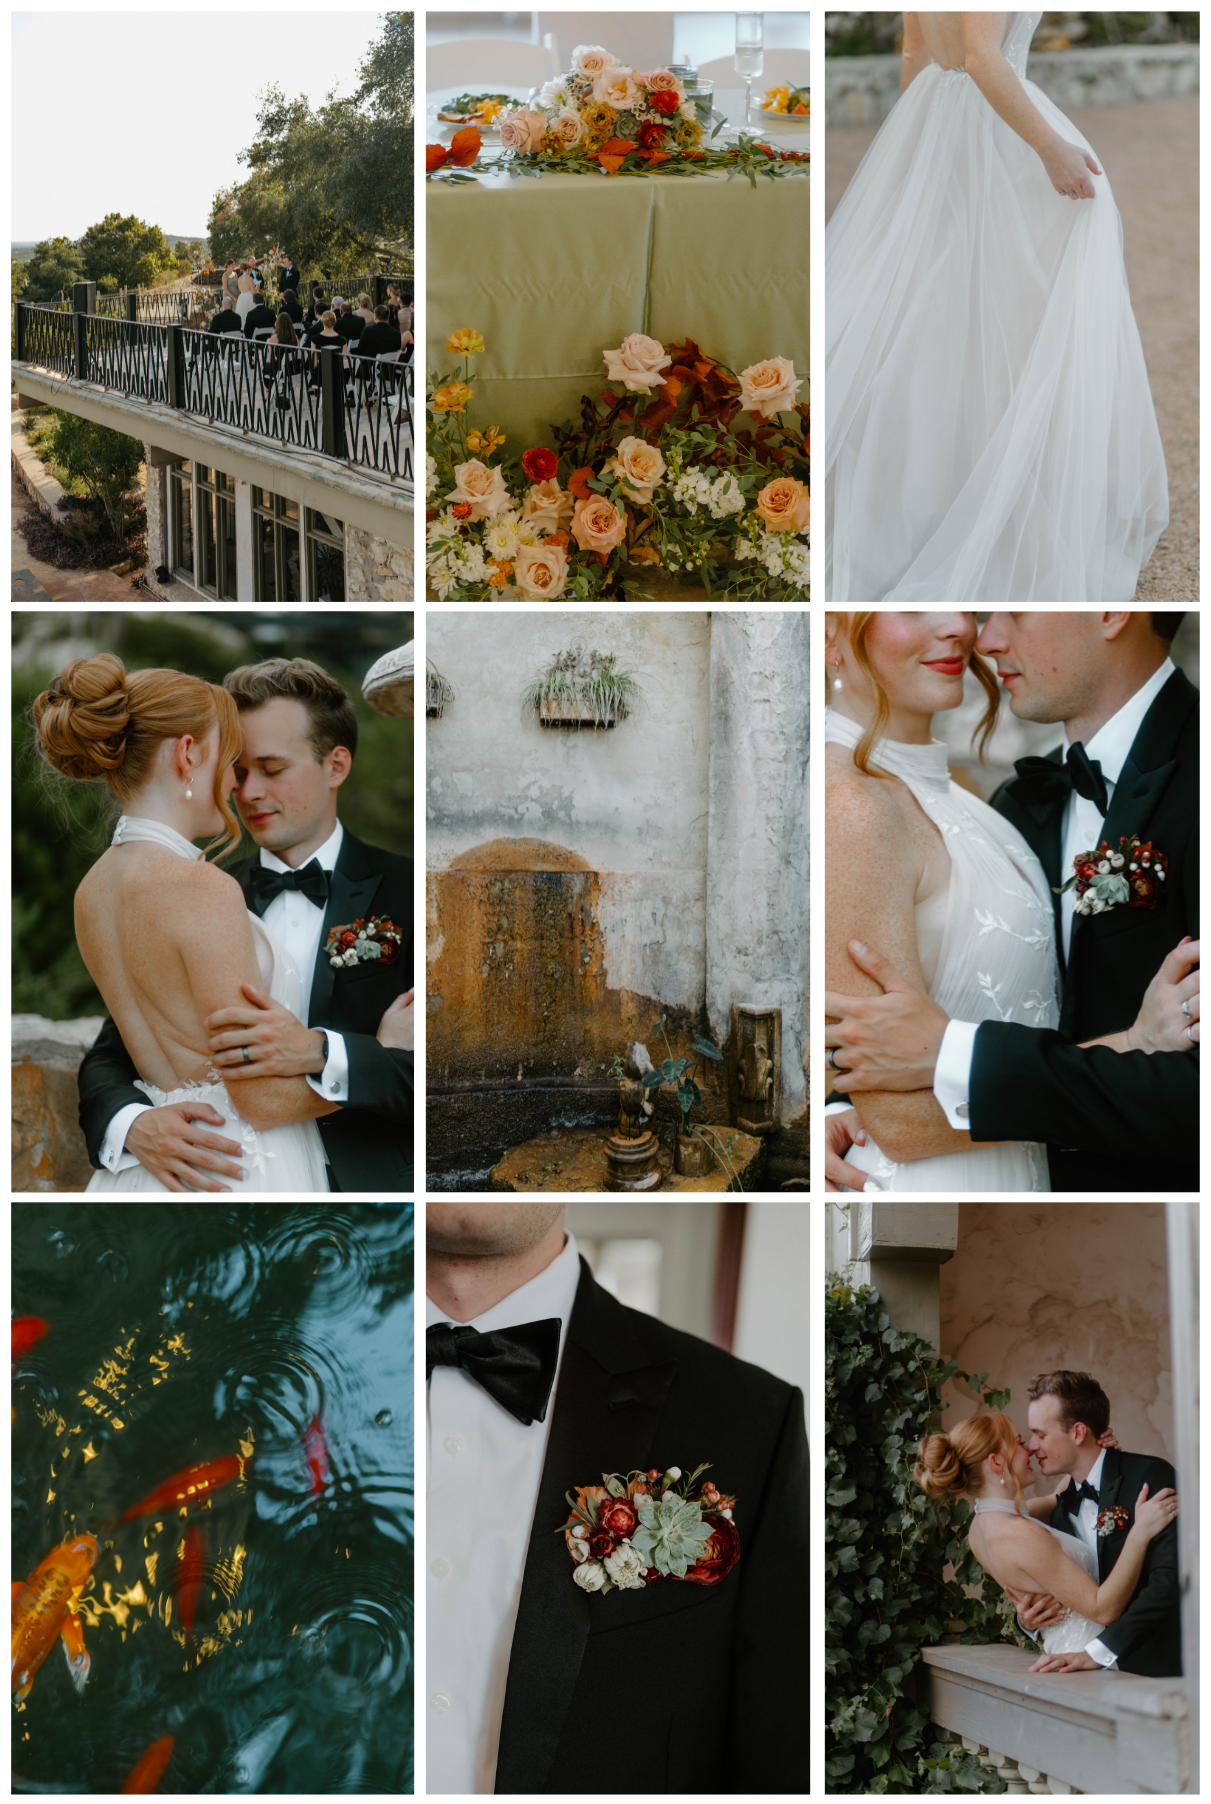 Villa Antonia Wedding highlight image collage featuring an autumn color palette, luxury photography and garden estate wedding vibes. 